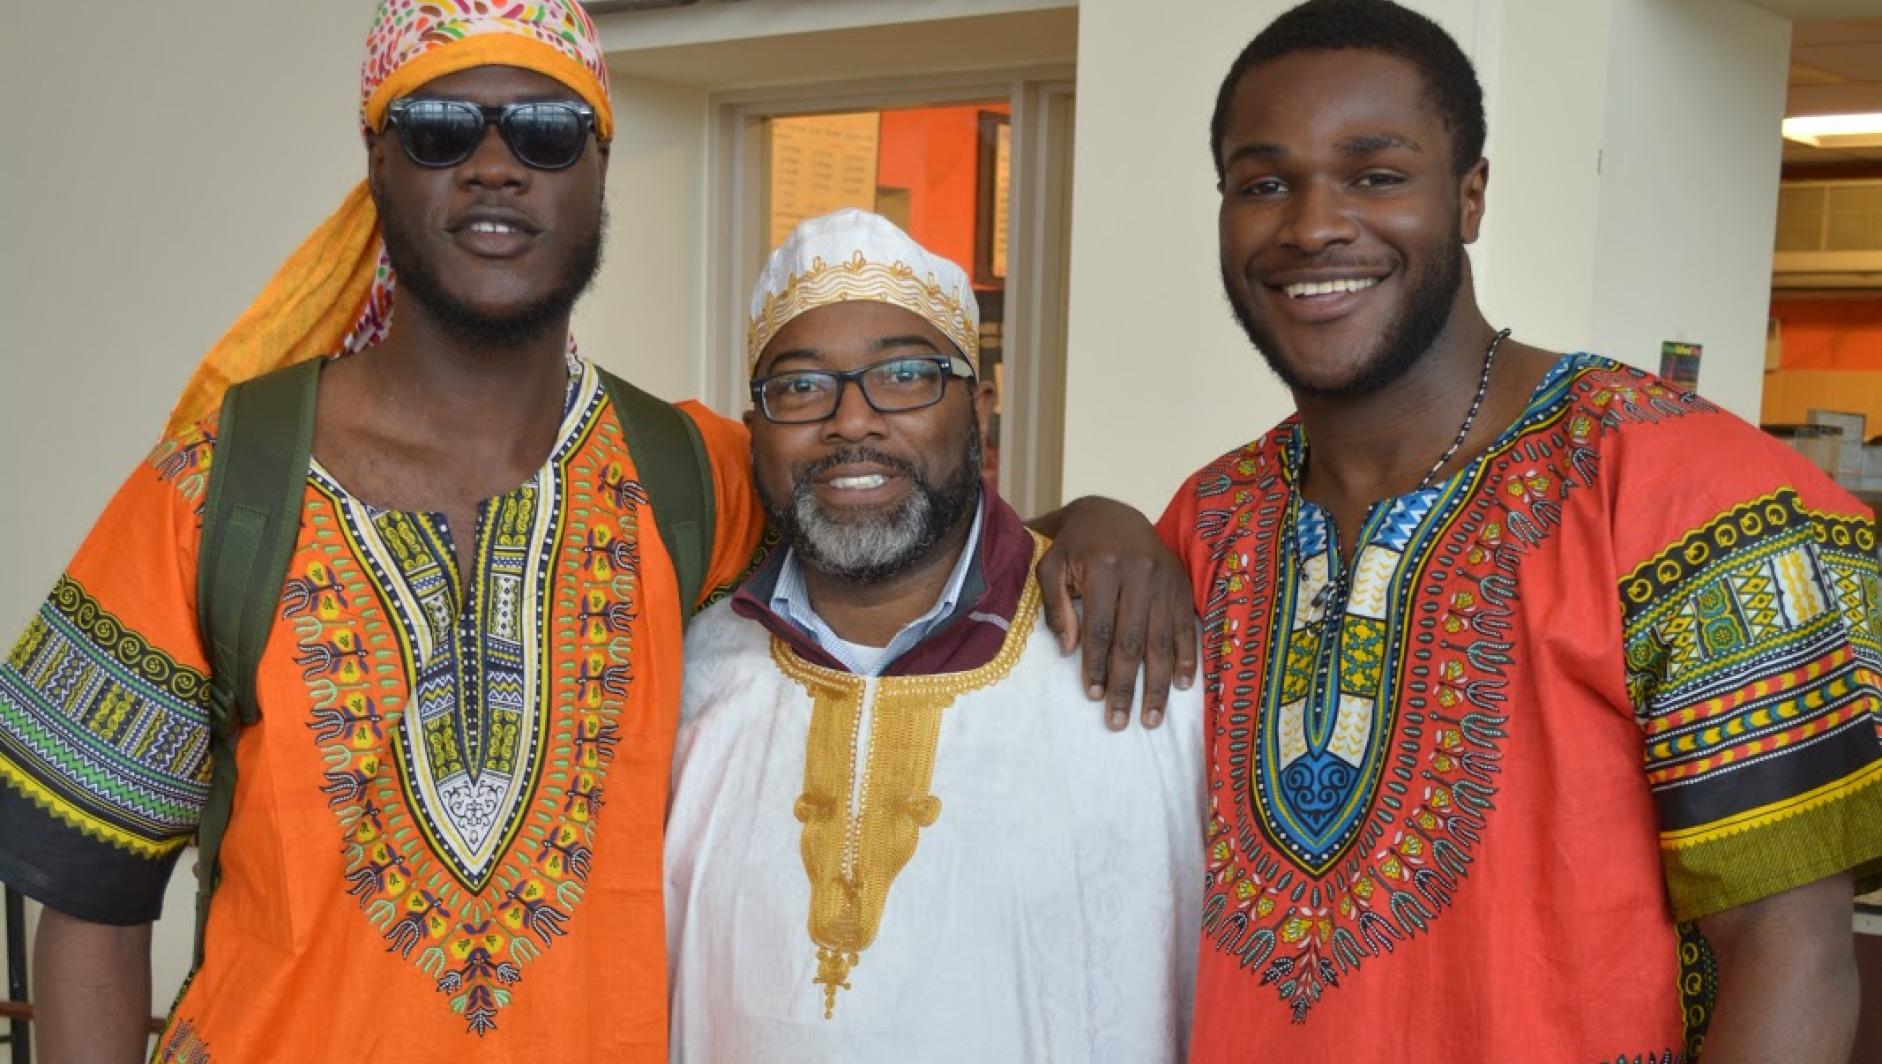 Calvin Hill poses with two male students